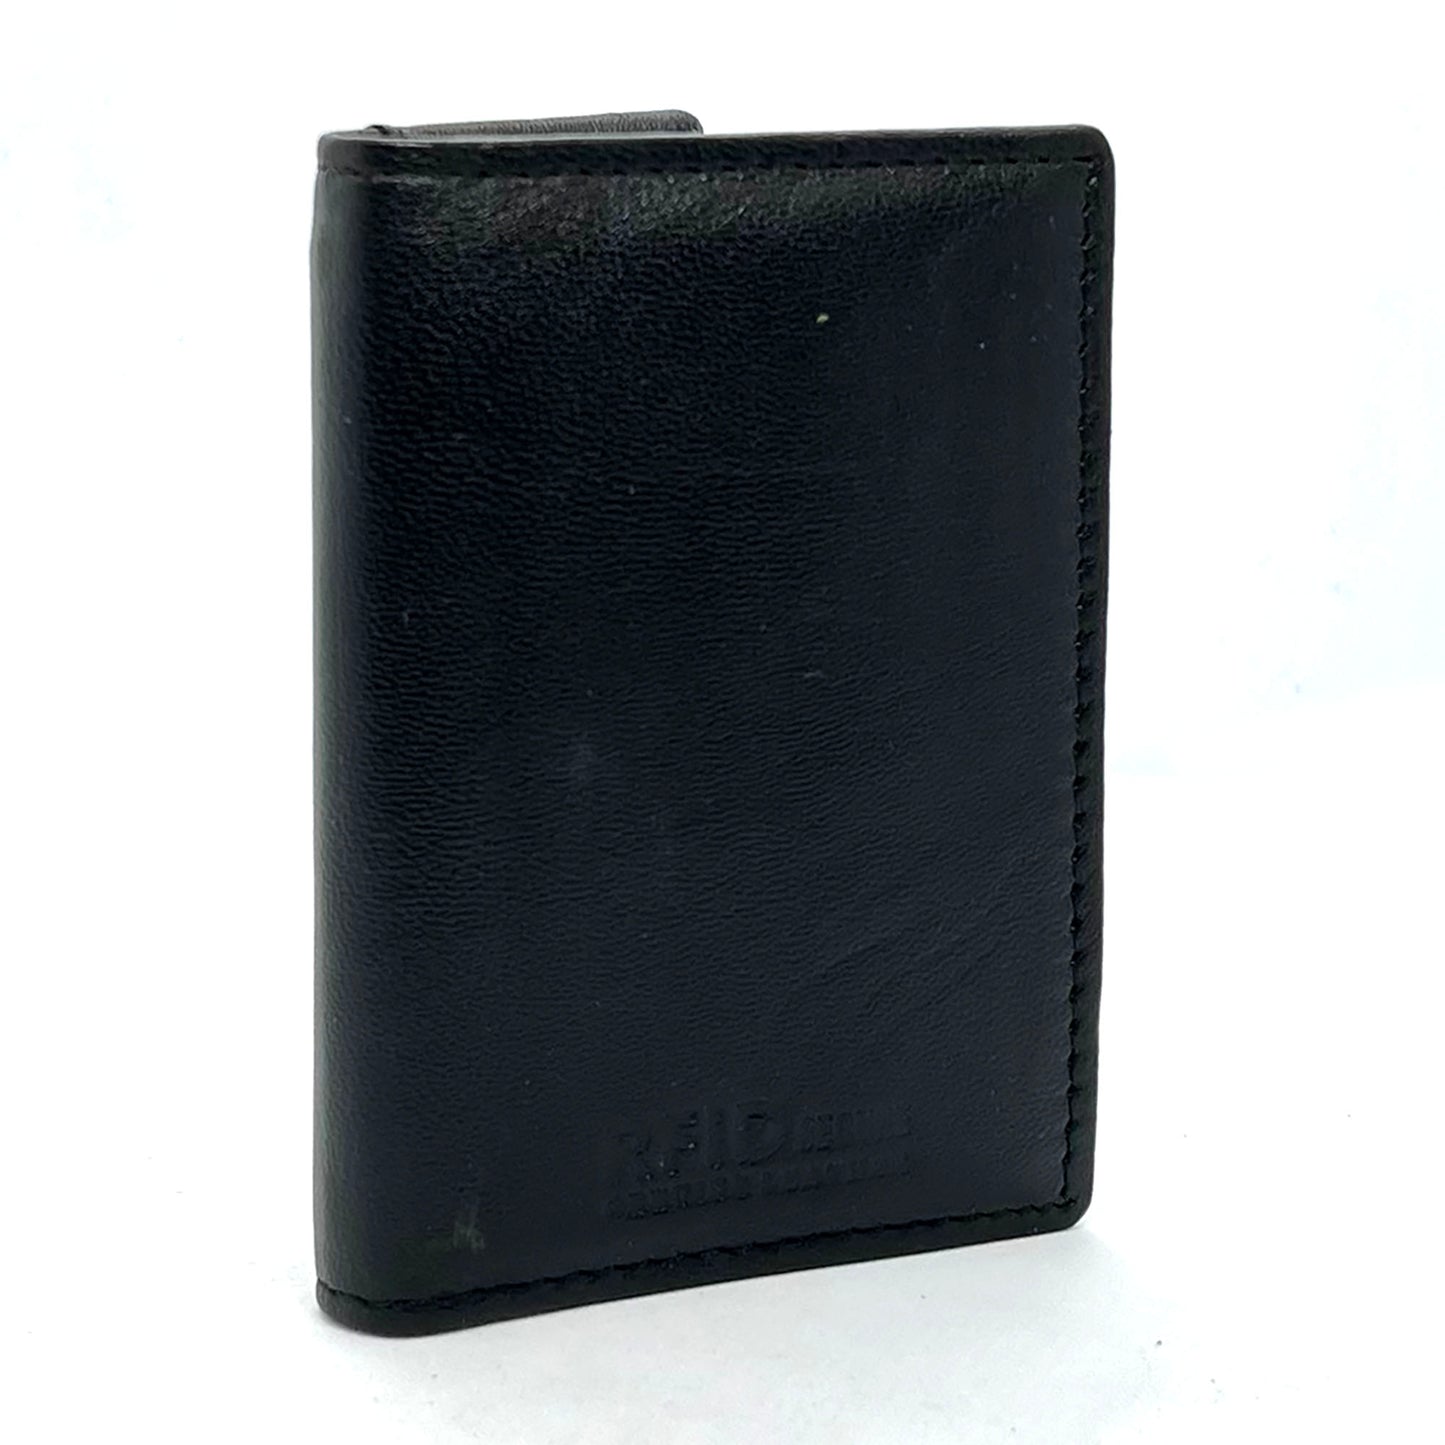 Black Leather Business Credit Card Wallet Pocket Organizer Clear Sleeve Insert